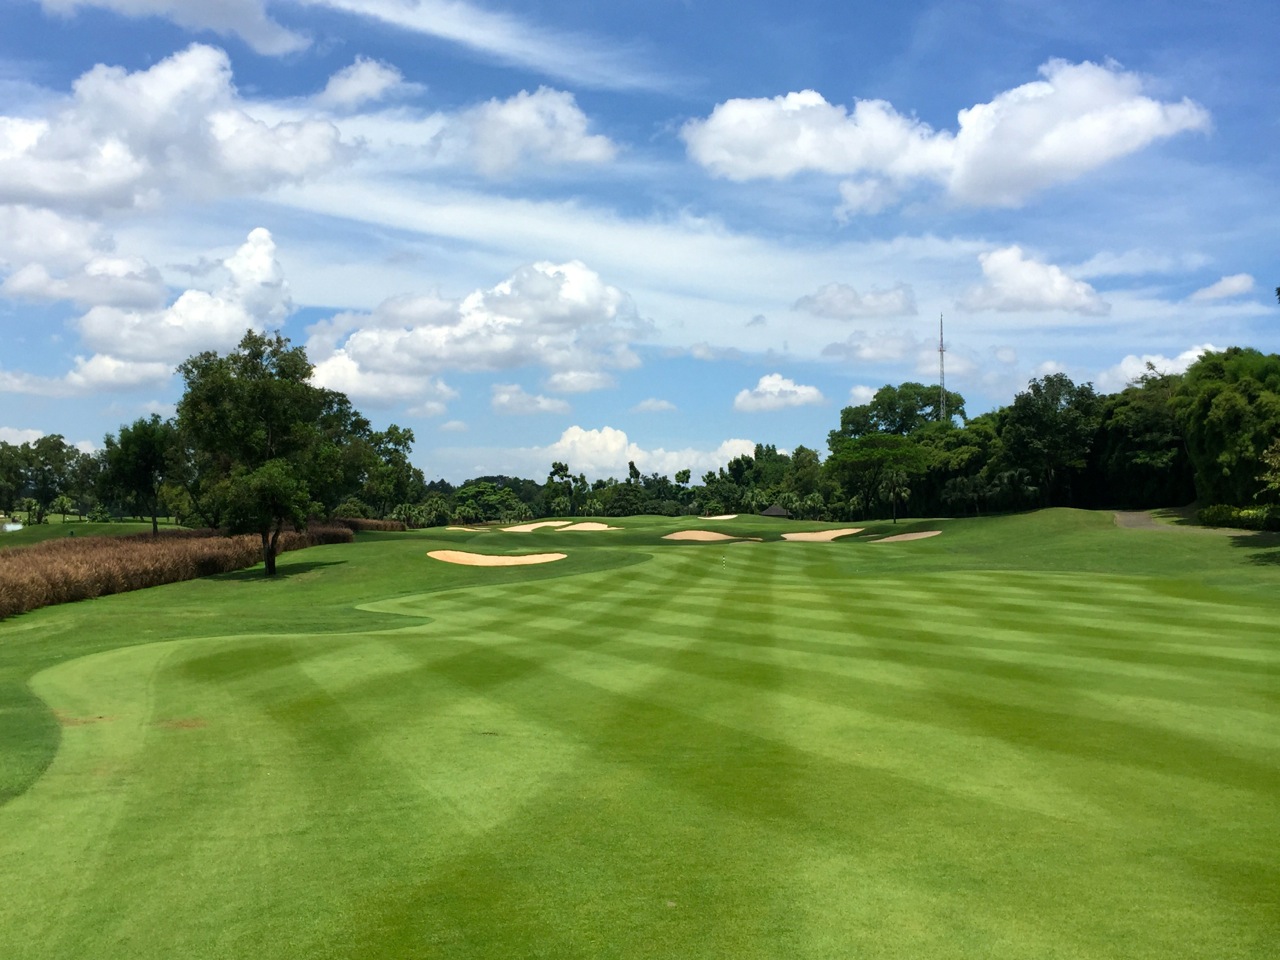 Royal Jakarta GC is beautifully maintained!